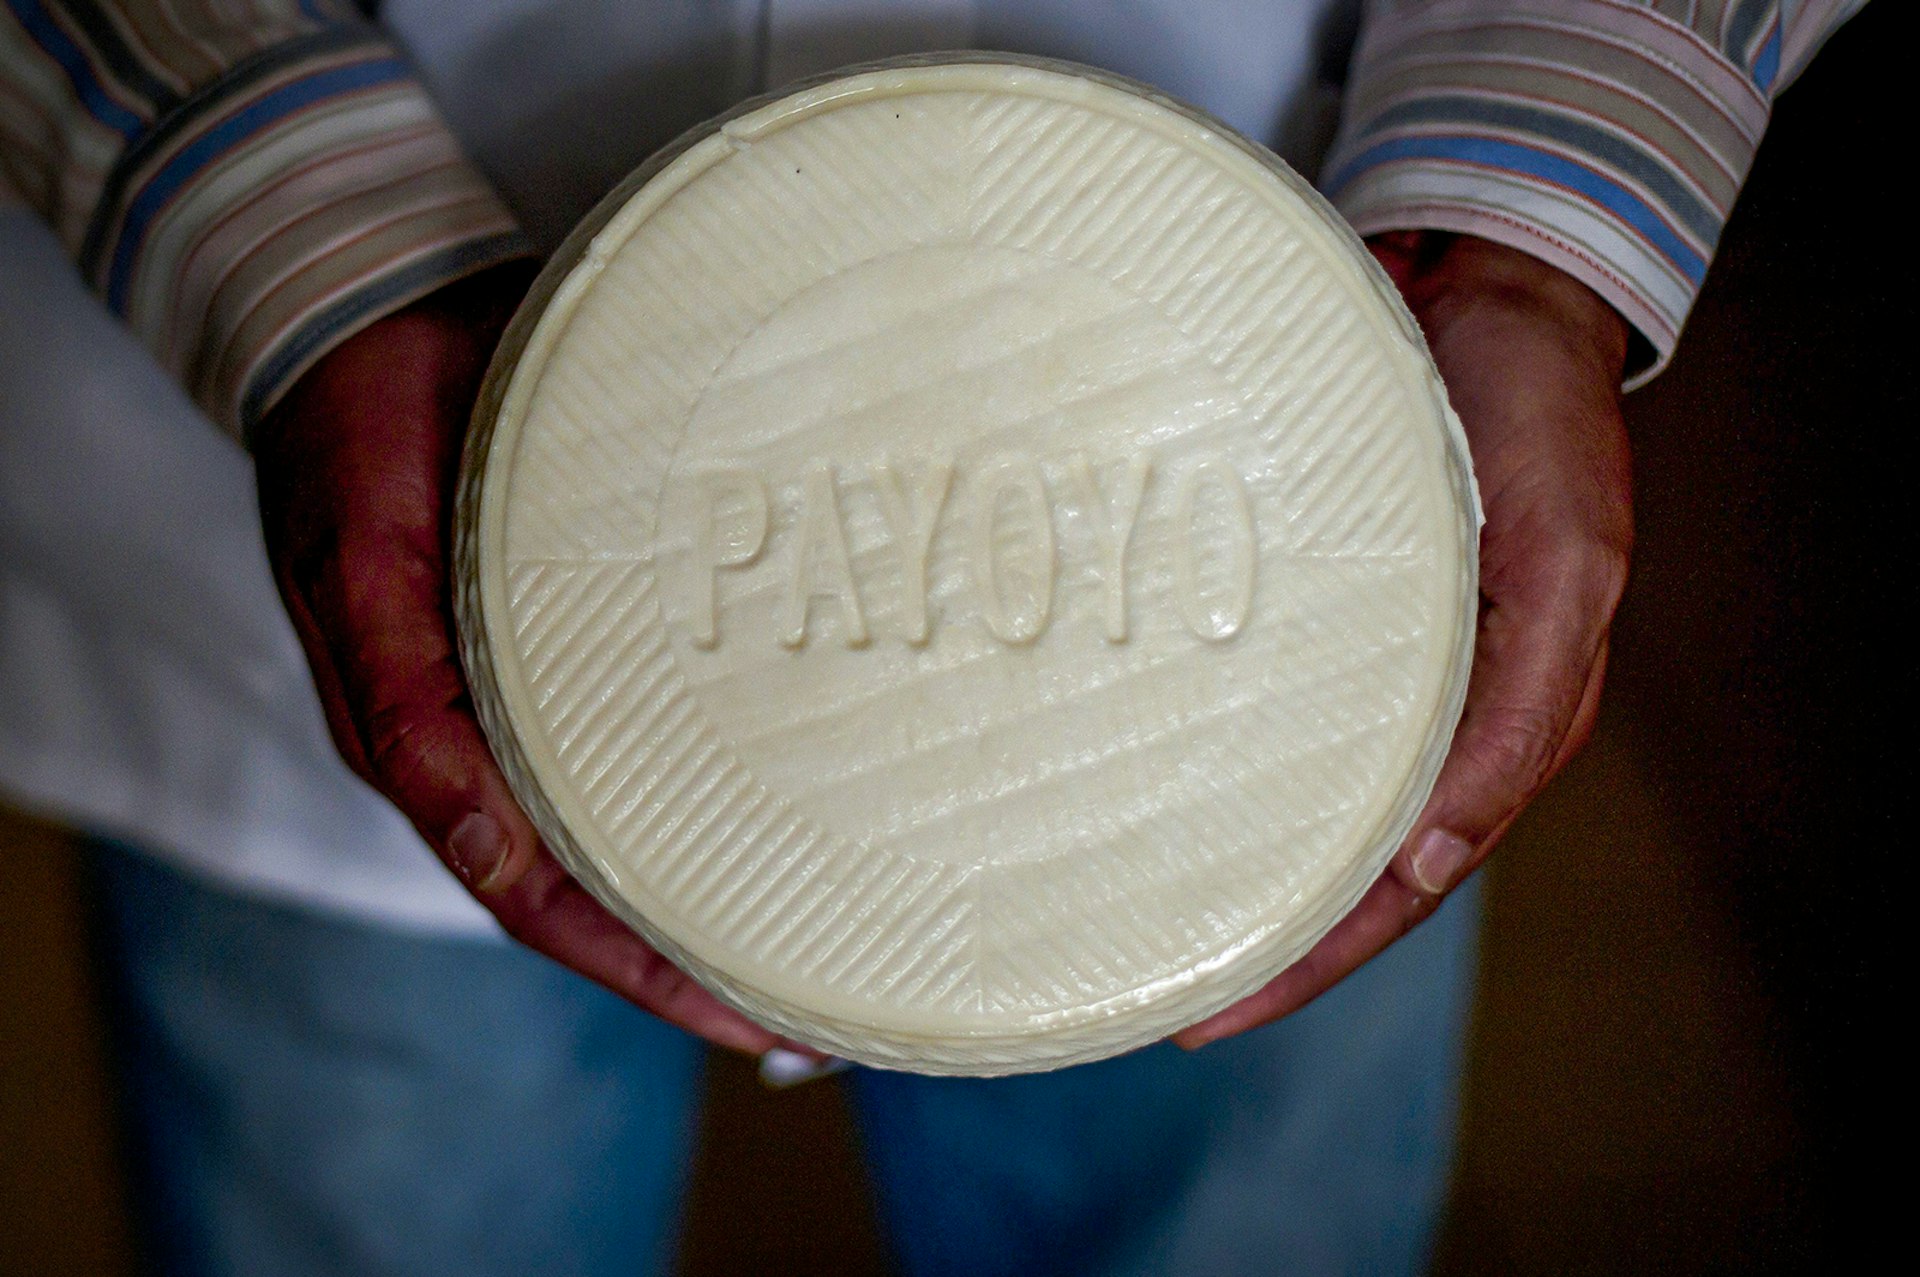 A person holds a wheel of cheese stamped with "Payayo." Cádiz, Spain.